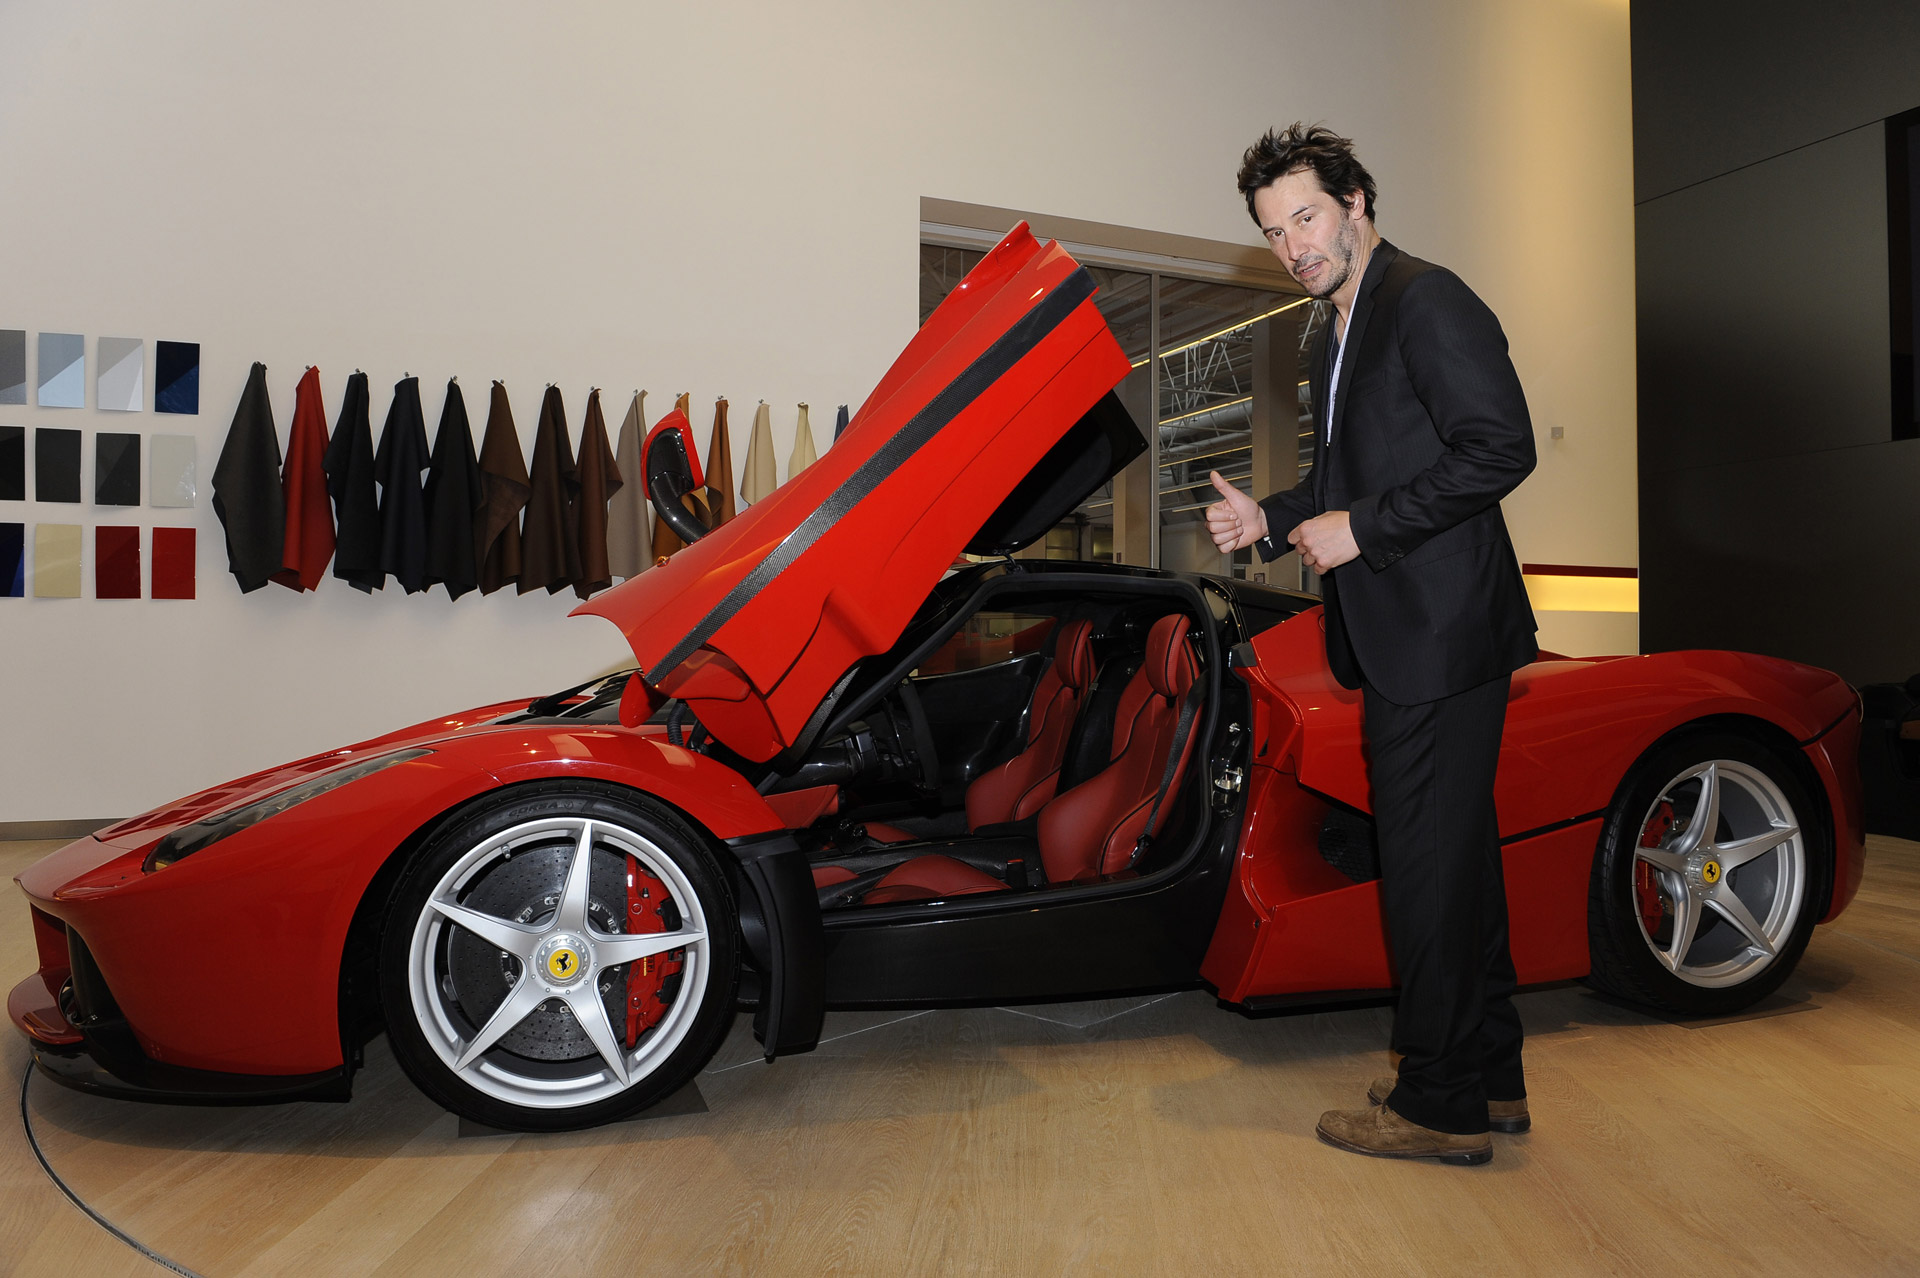 bao john wick surprised the world when he showed off the ferrari laferrari that his girlfriend gave him on the occasion of years of love and helped him change his life 652e9978d210b John Wick Surprised The World When He Showed Off The Ferrari Laferrari That His Girlfriend Gave Him On The Occasion Of 10 Years Of Love And Helped Him Change His Life.